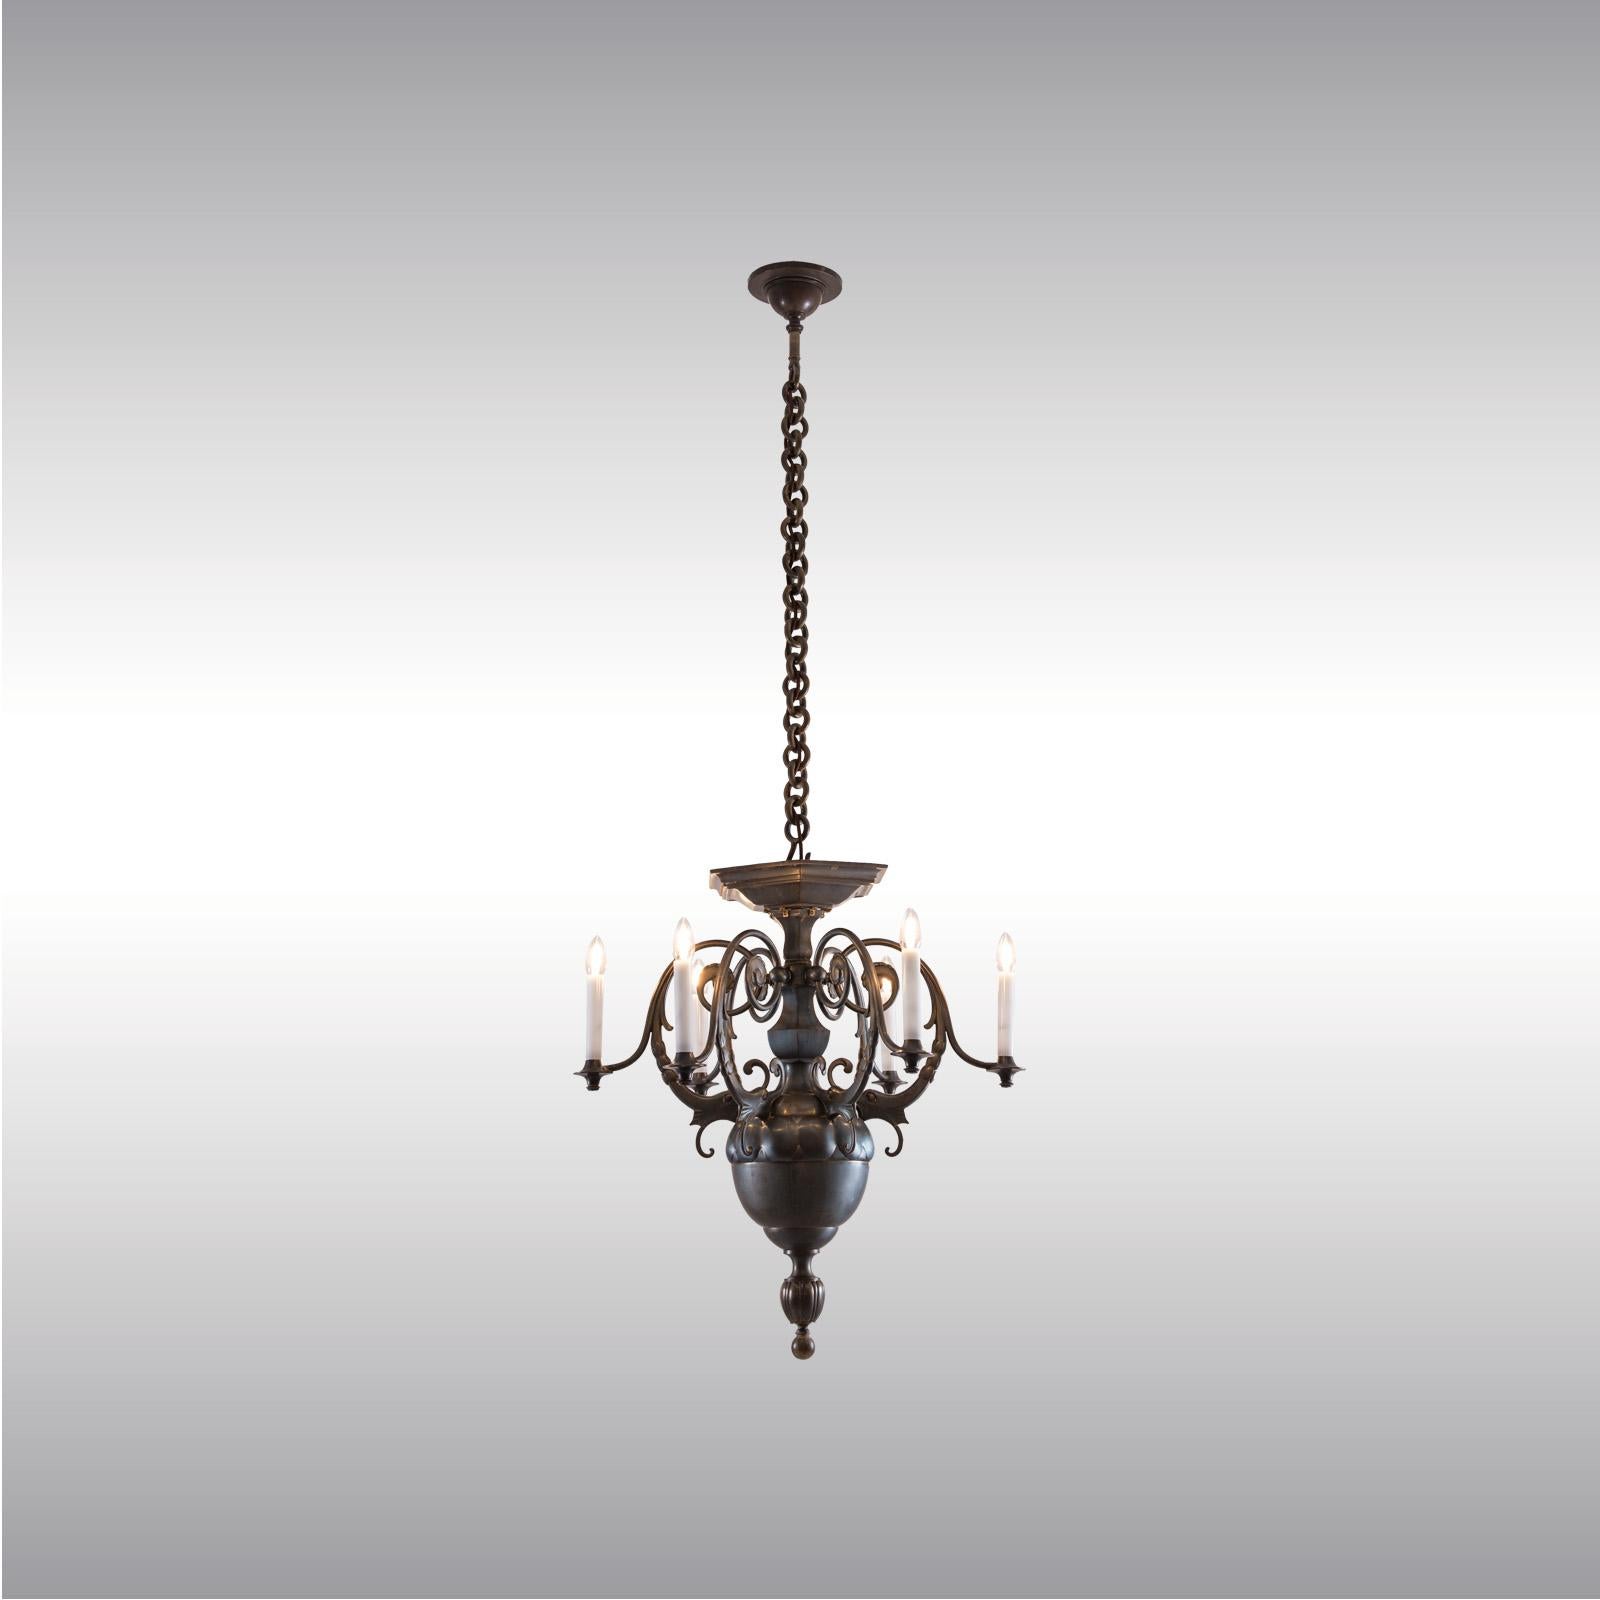 Hand-Crafted Original Early Art Deco Bronze Chandelier, 1914 20th Century For Sale